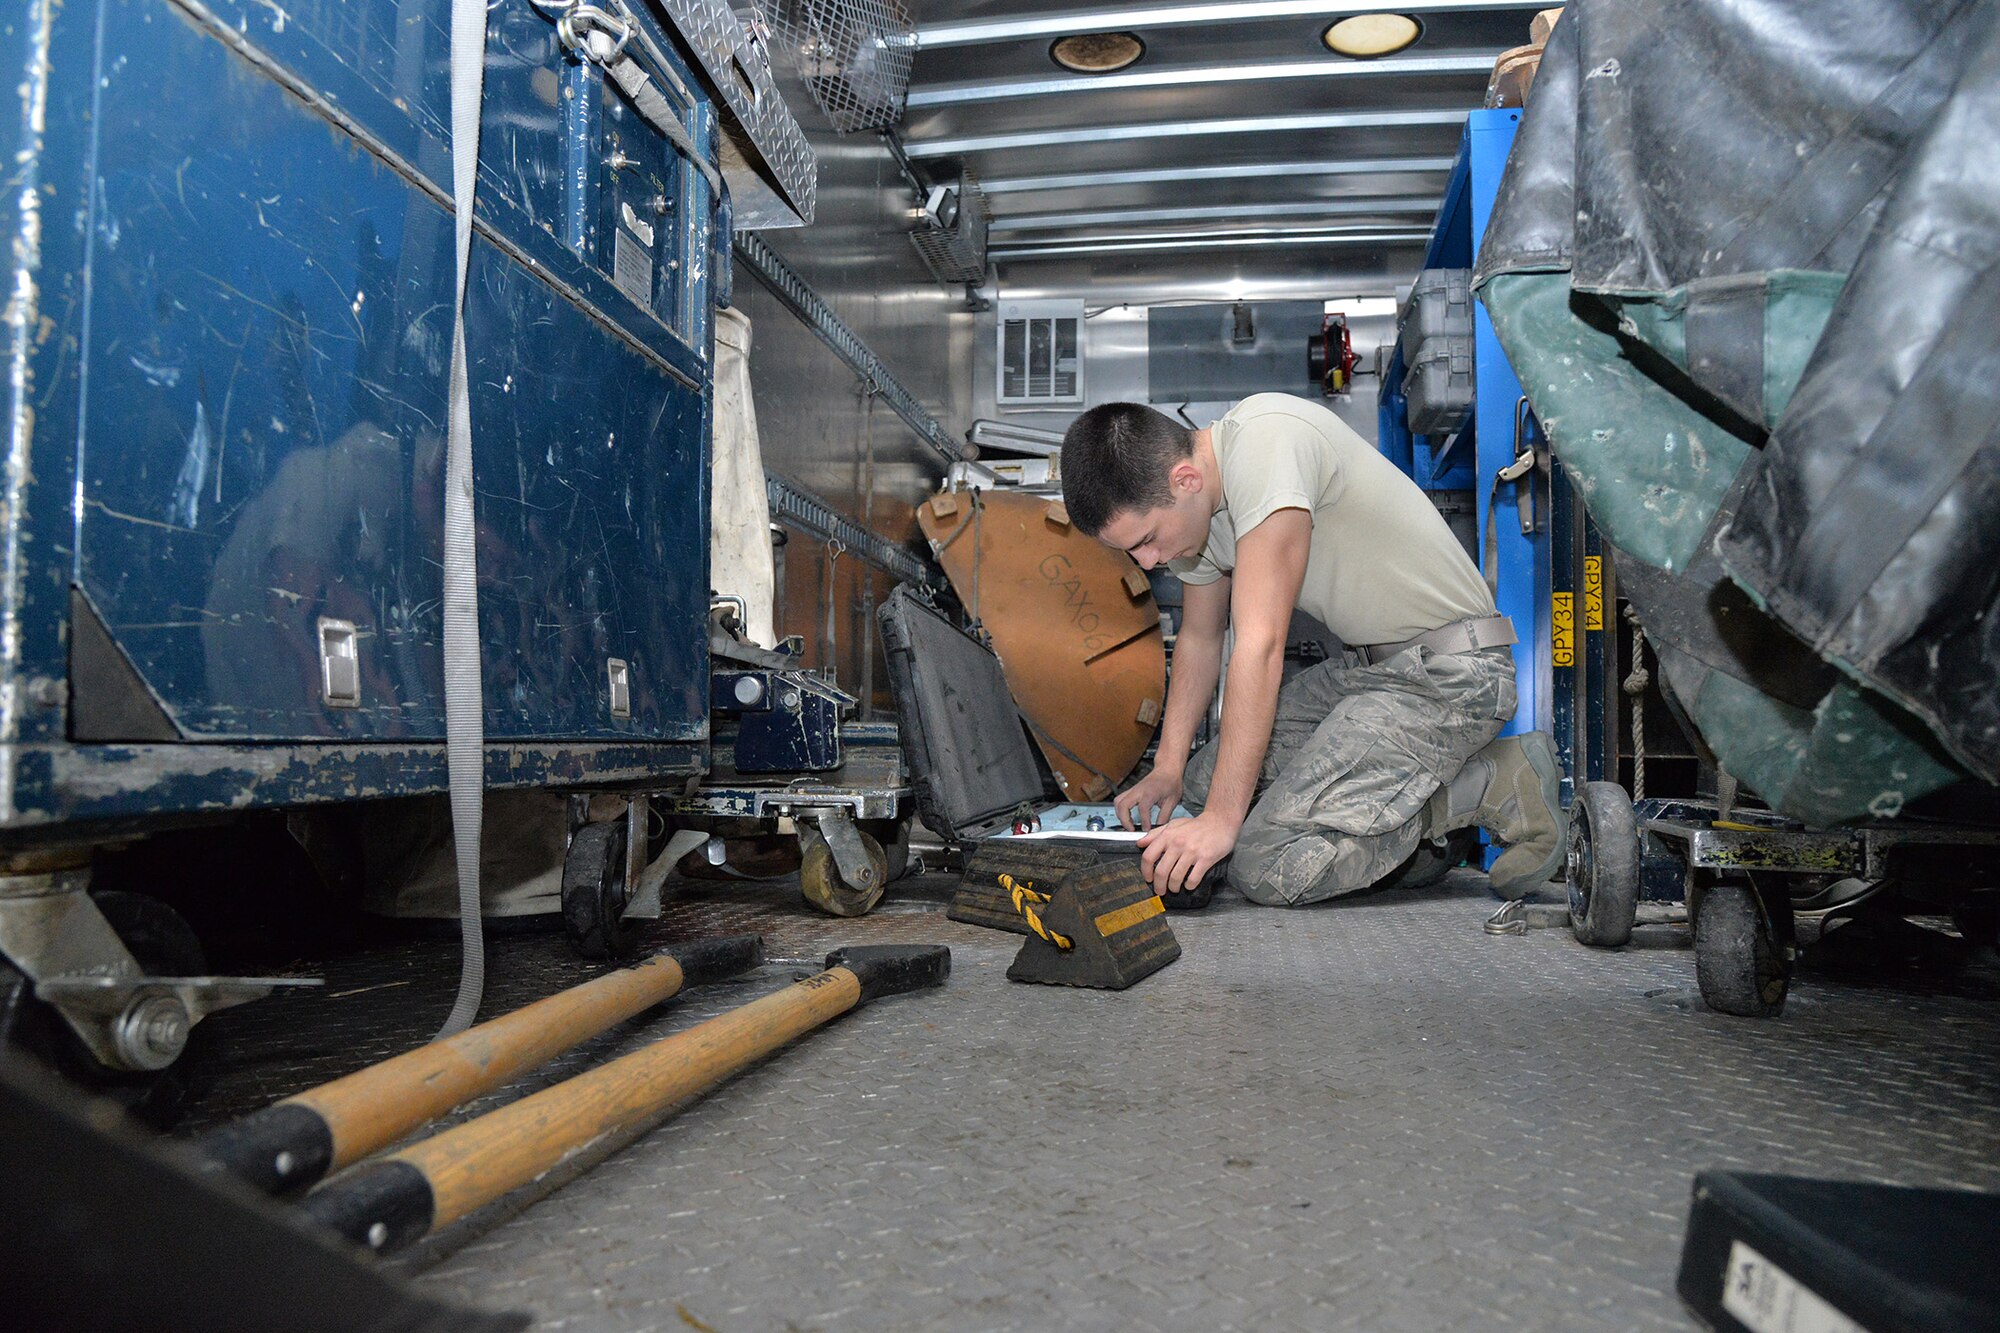 Senior Airman Justin Vasquez, 341st Missile Maintenance Squadron maintenance technician, takes inventory of equipment inside a maintenance van Jan. 17, 2017, at Malmstrom Air Force Base, Mont. The van is taken out to each work location and is used to house all 3,500 pounds of equipment the maintenance teams need to complete a job. (U.S. Air Force photo/Airman 1st Class Daniel Brosam)